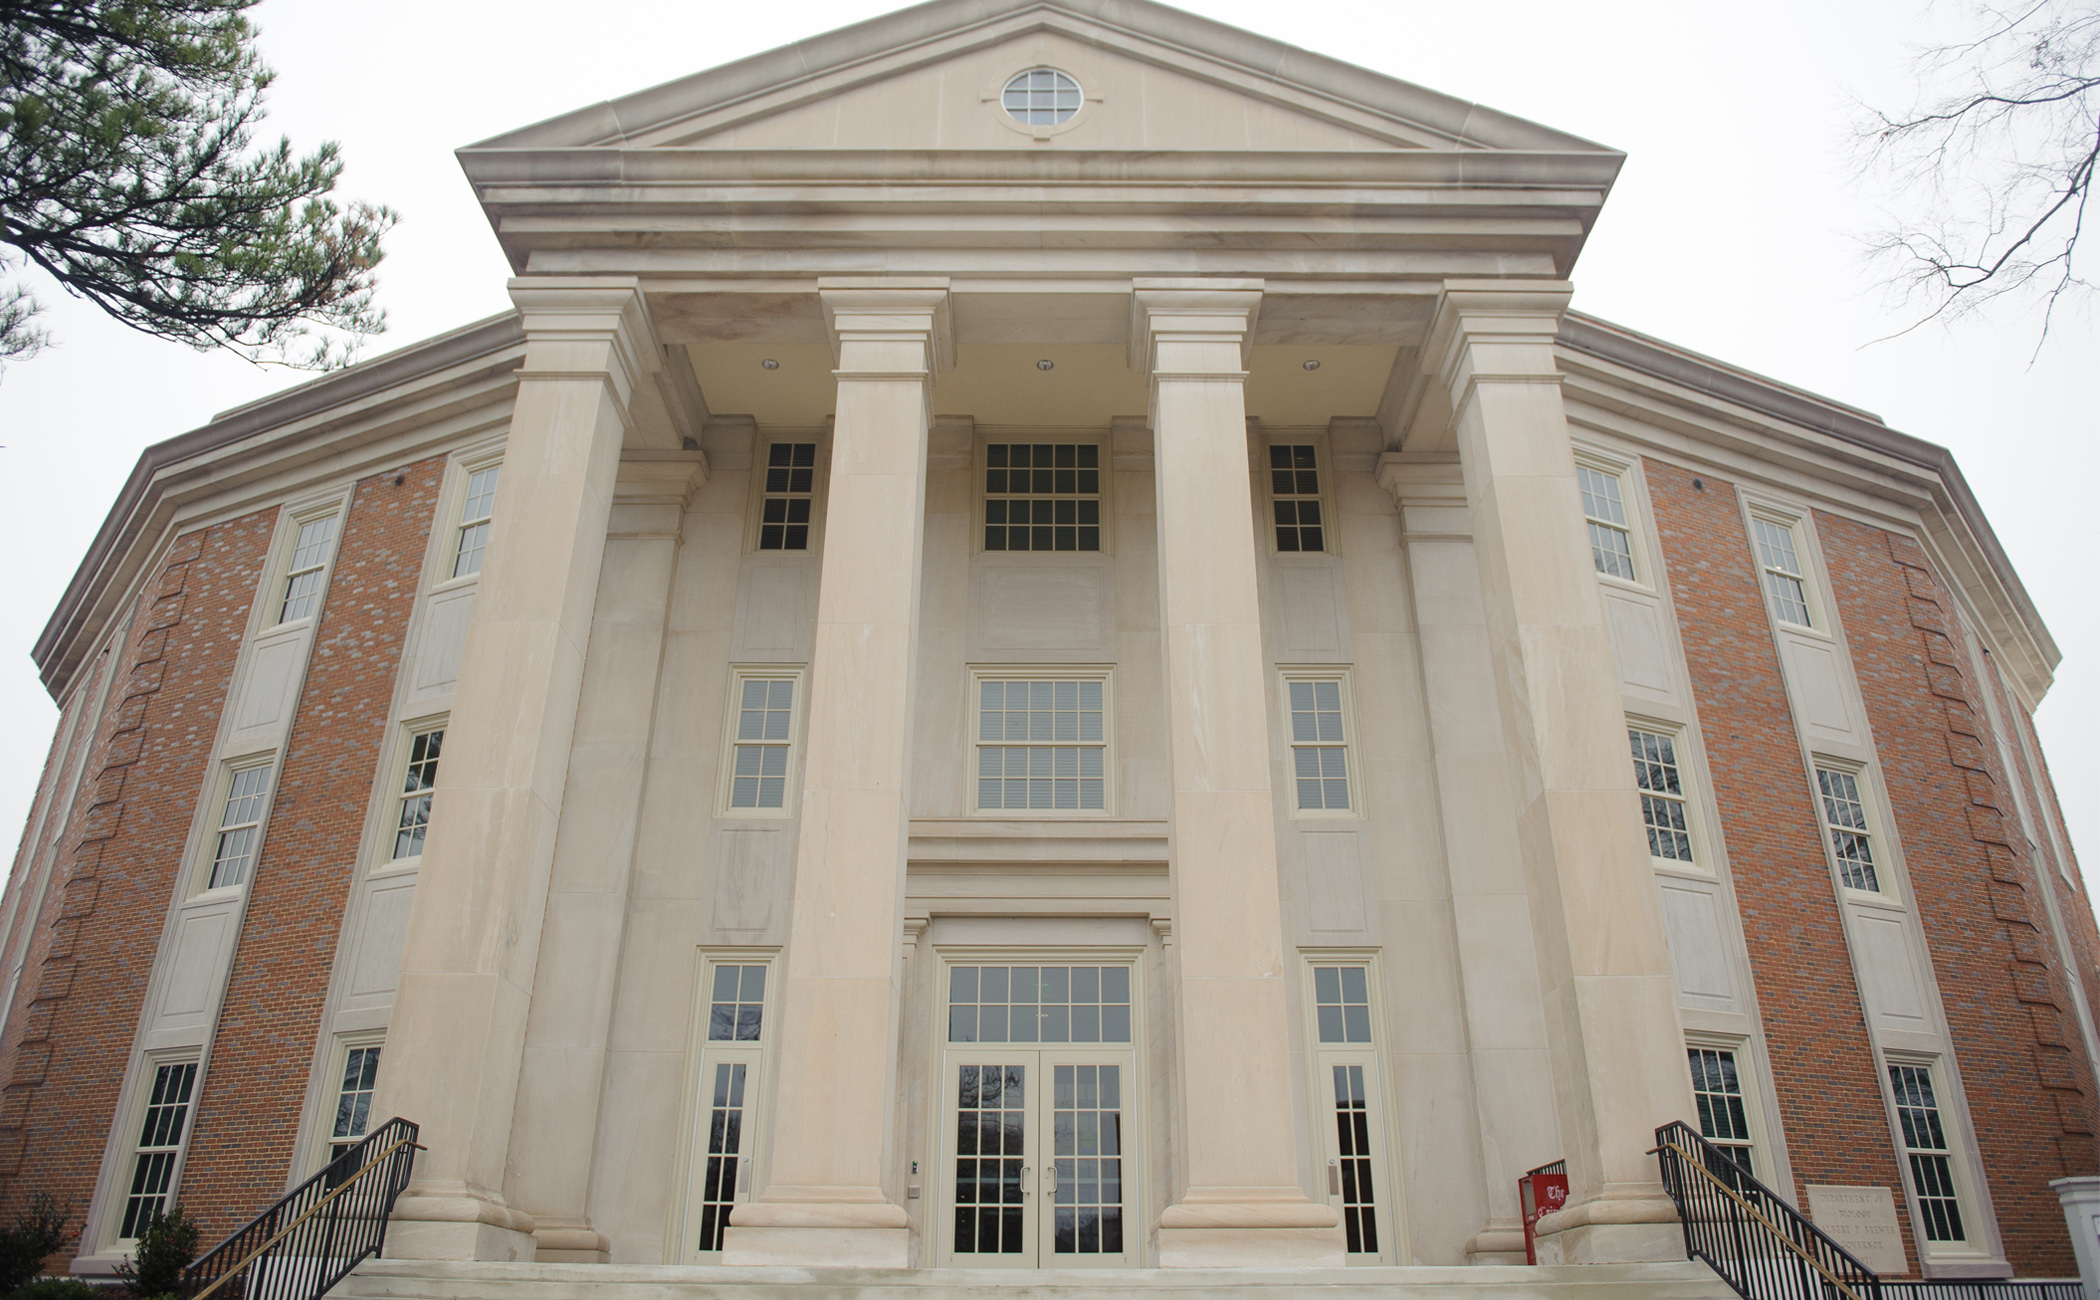 The front entrance of the Math and Science Education Building